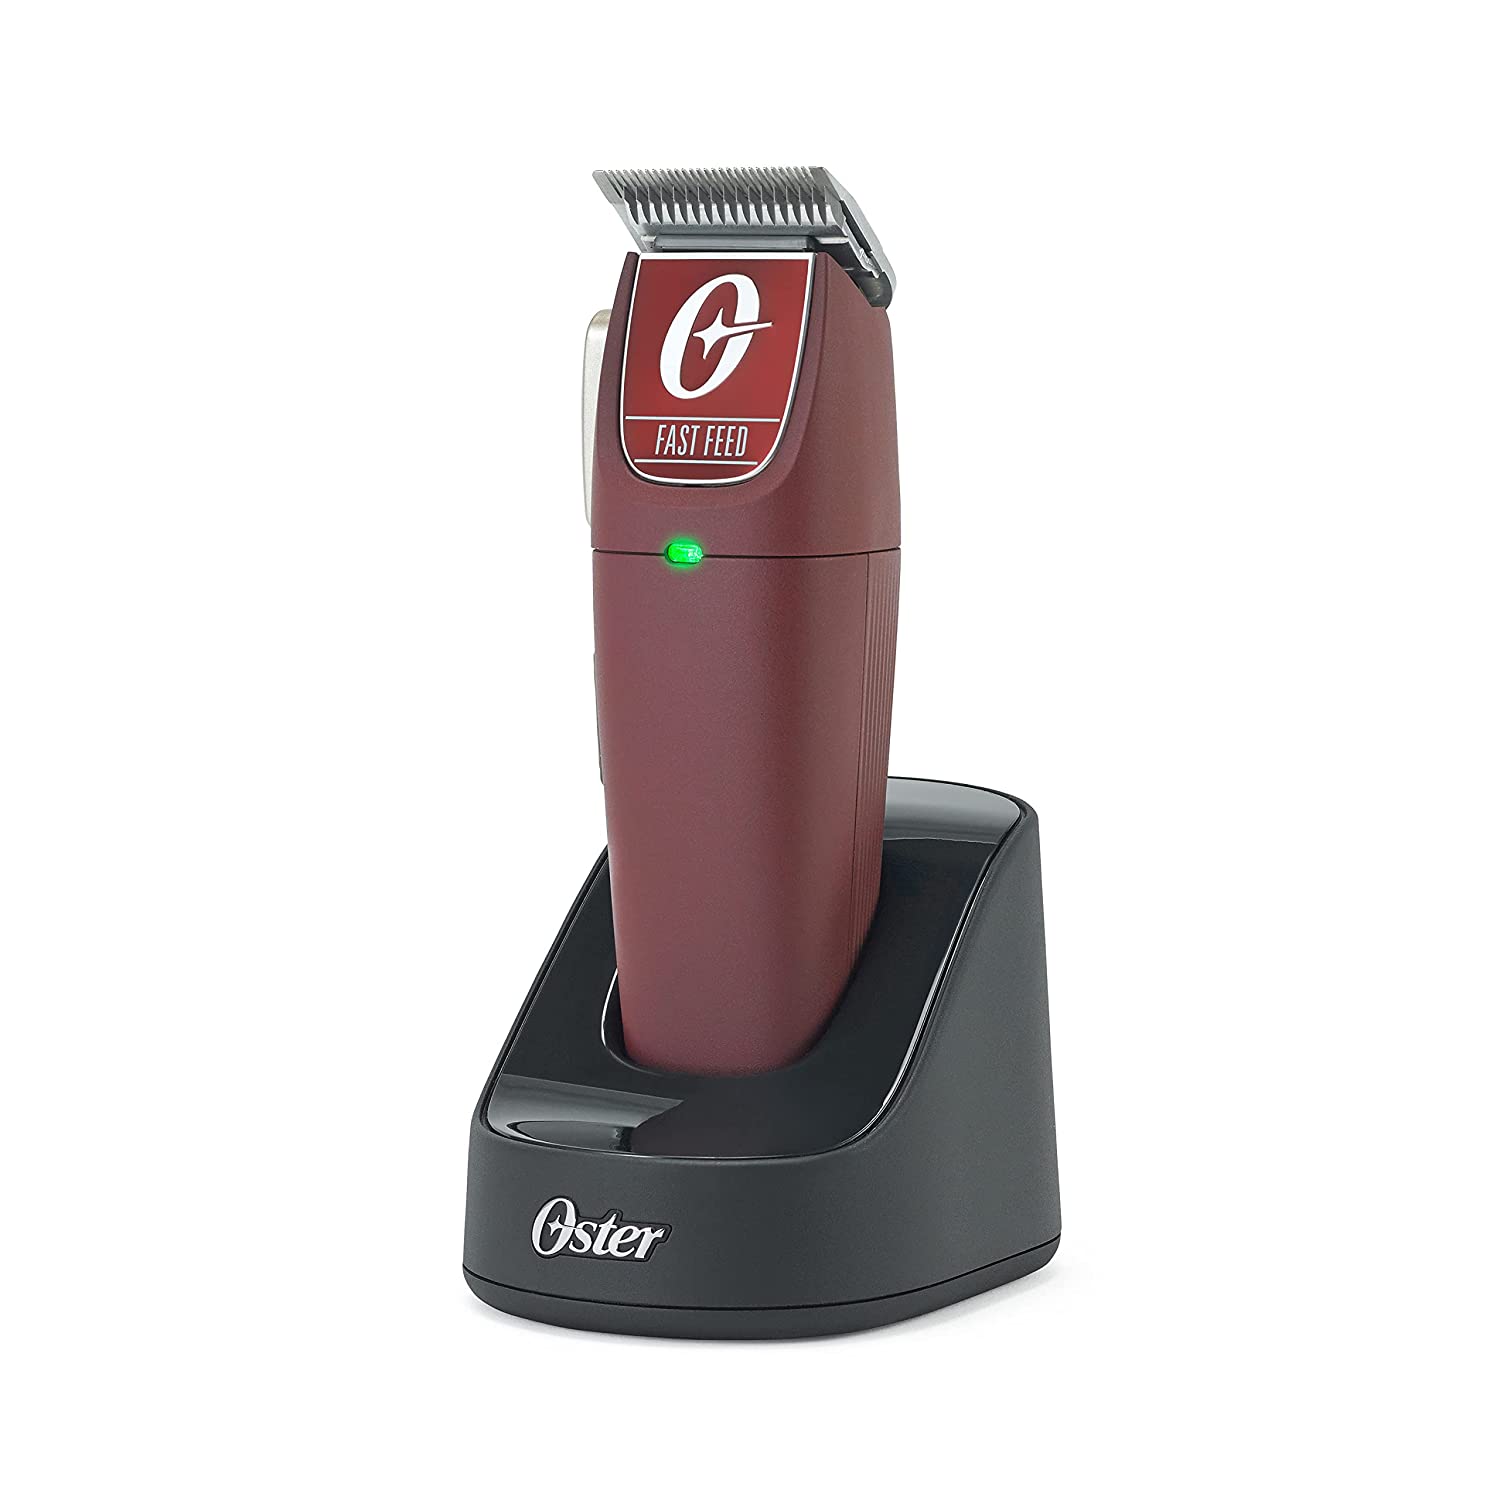 Best Oster Clippers